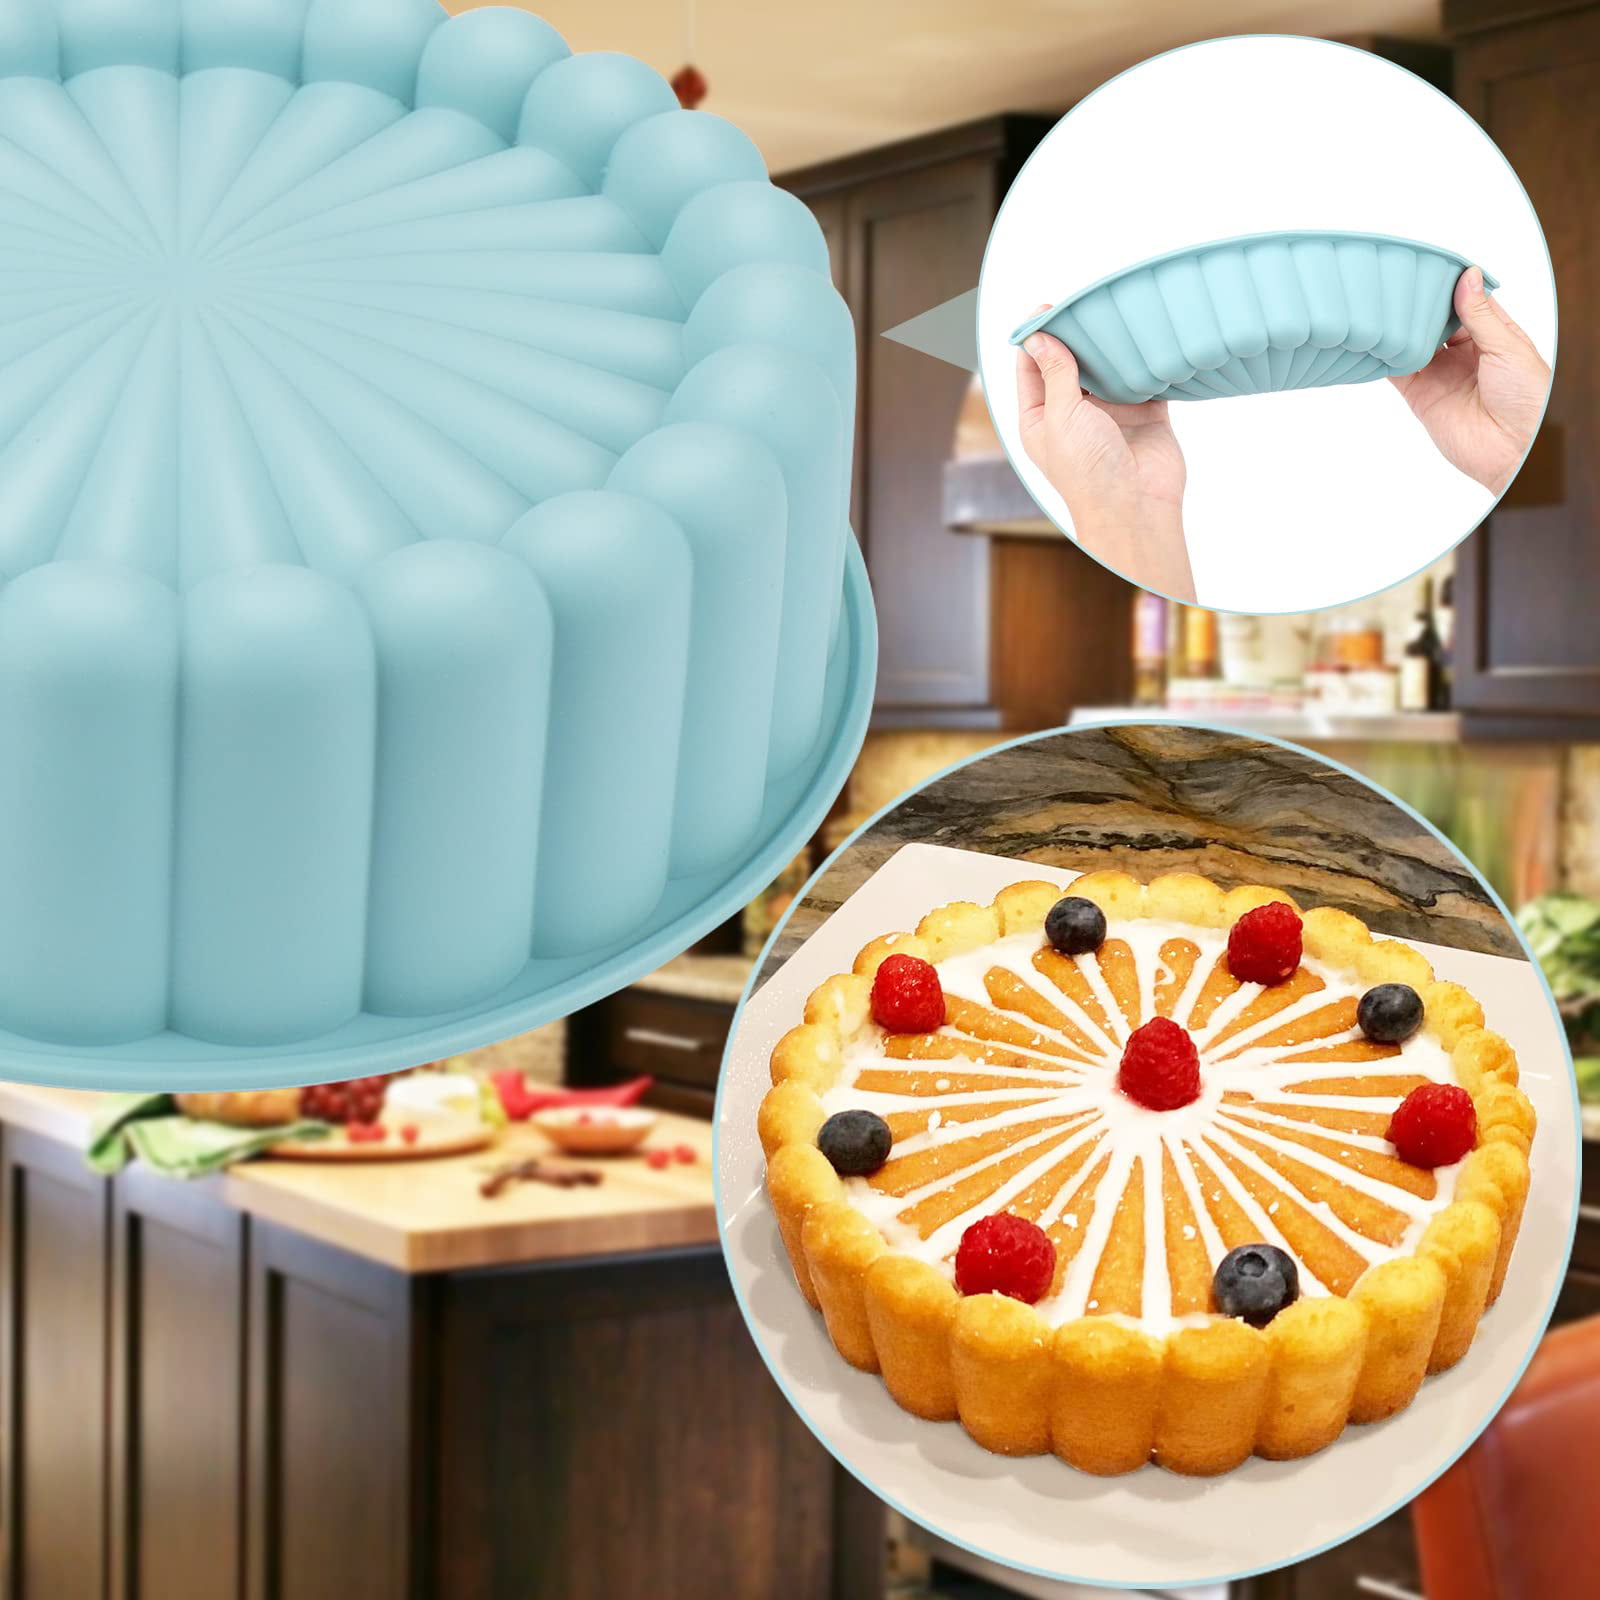 Silicone Charlotte Cake Pan, 8 Inch Nonstick Round Silicone Molds for  Cheesecake, Strawberry Shortcake Bakken Pan Cake Pan Mould for Chocolate  Cake Brownie Tart Pie Flan Bread Baking (Blue)